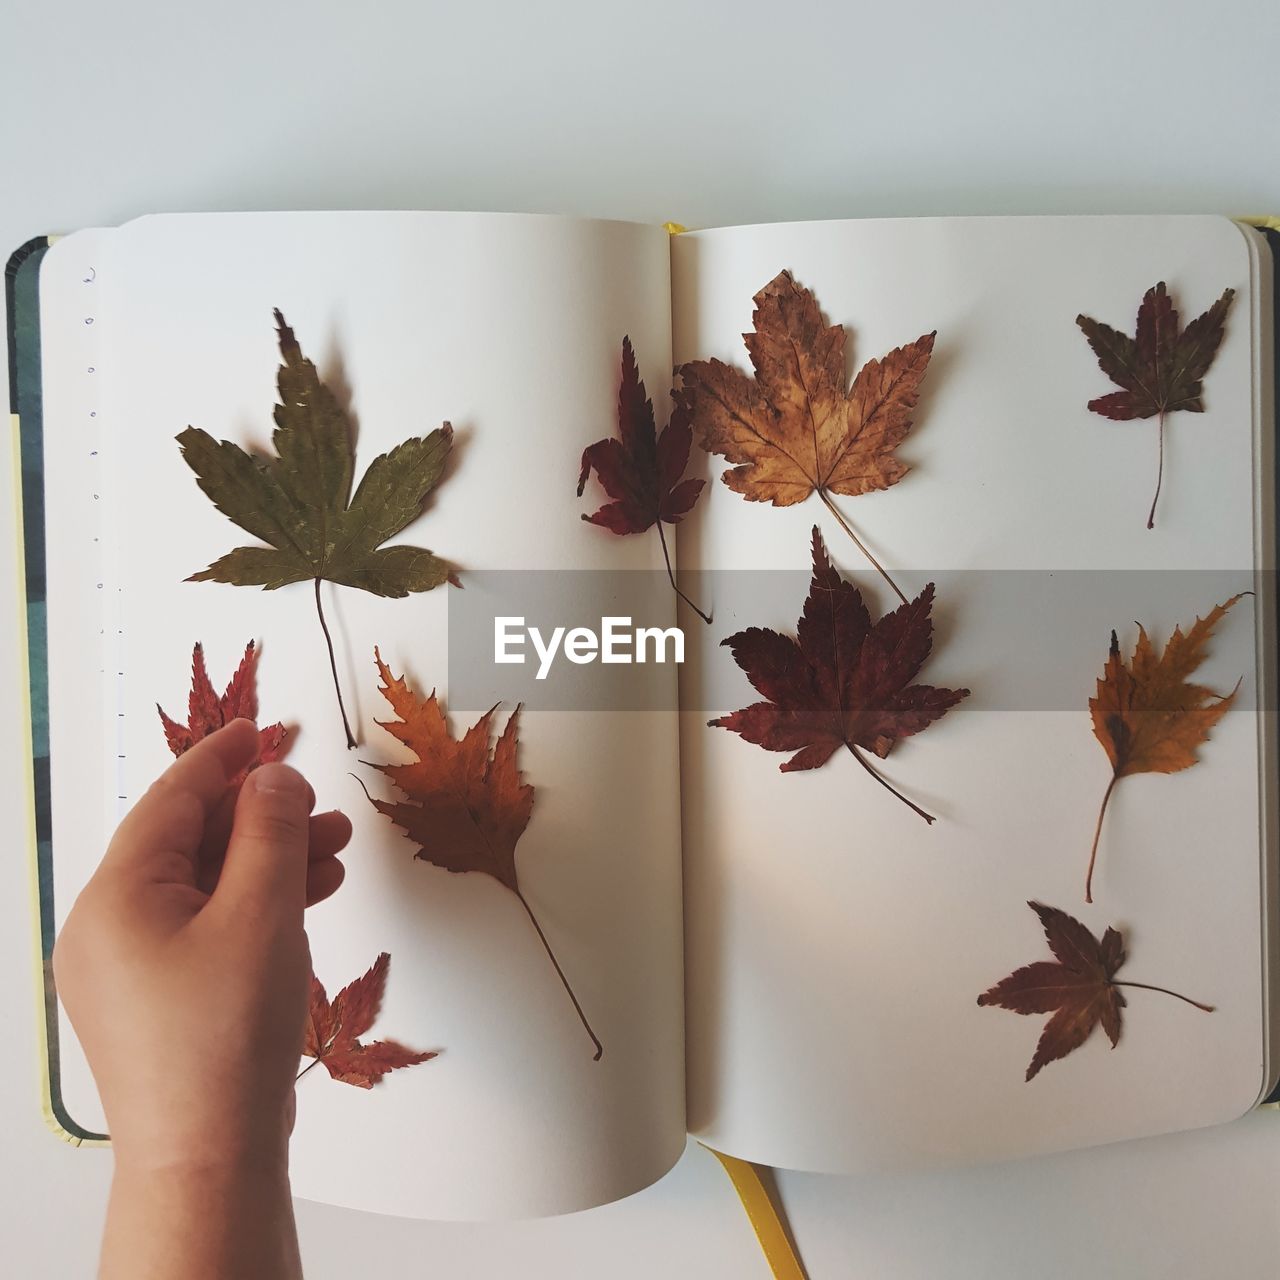 Cropped hand of woman arranging autumn leaves on book over white background